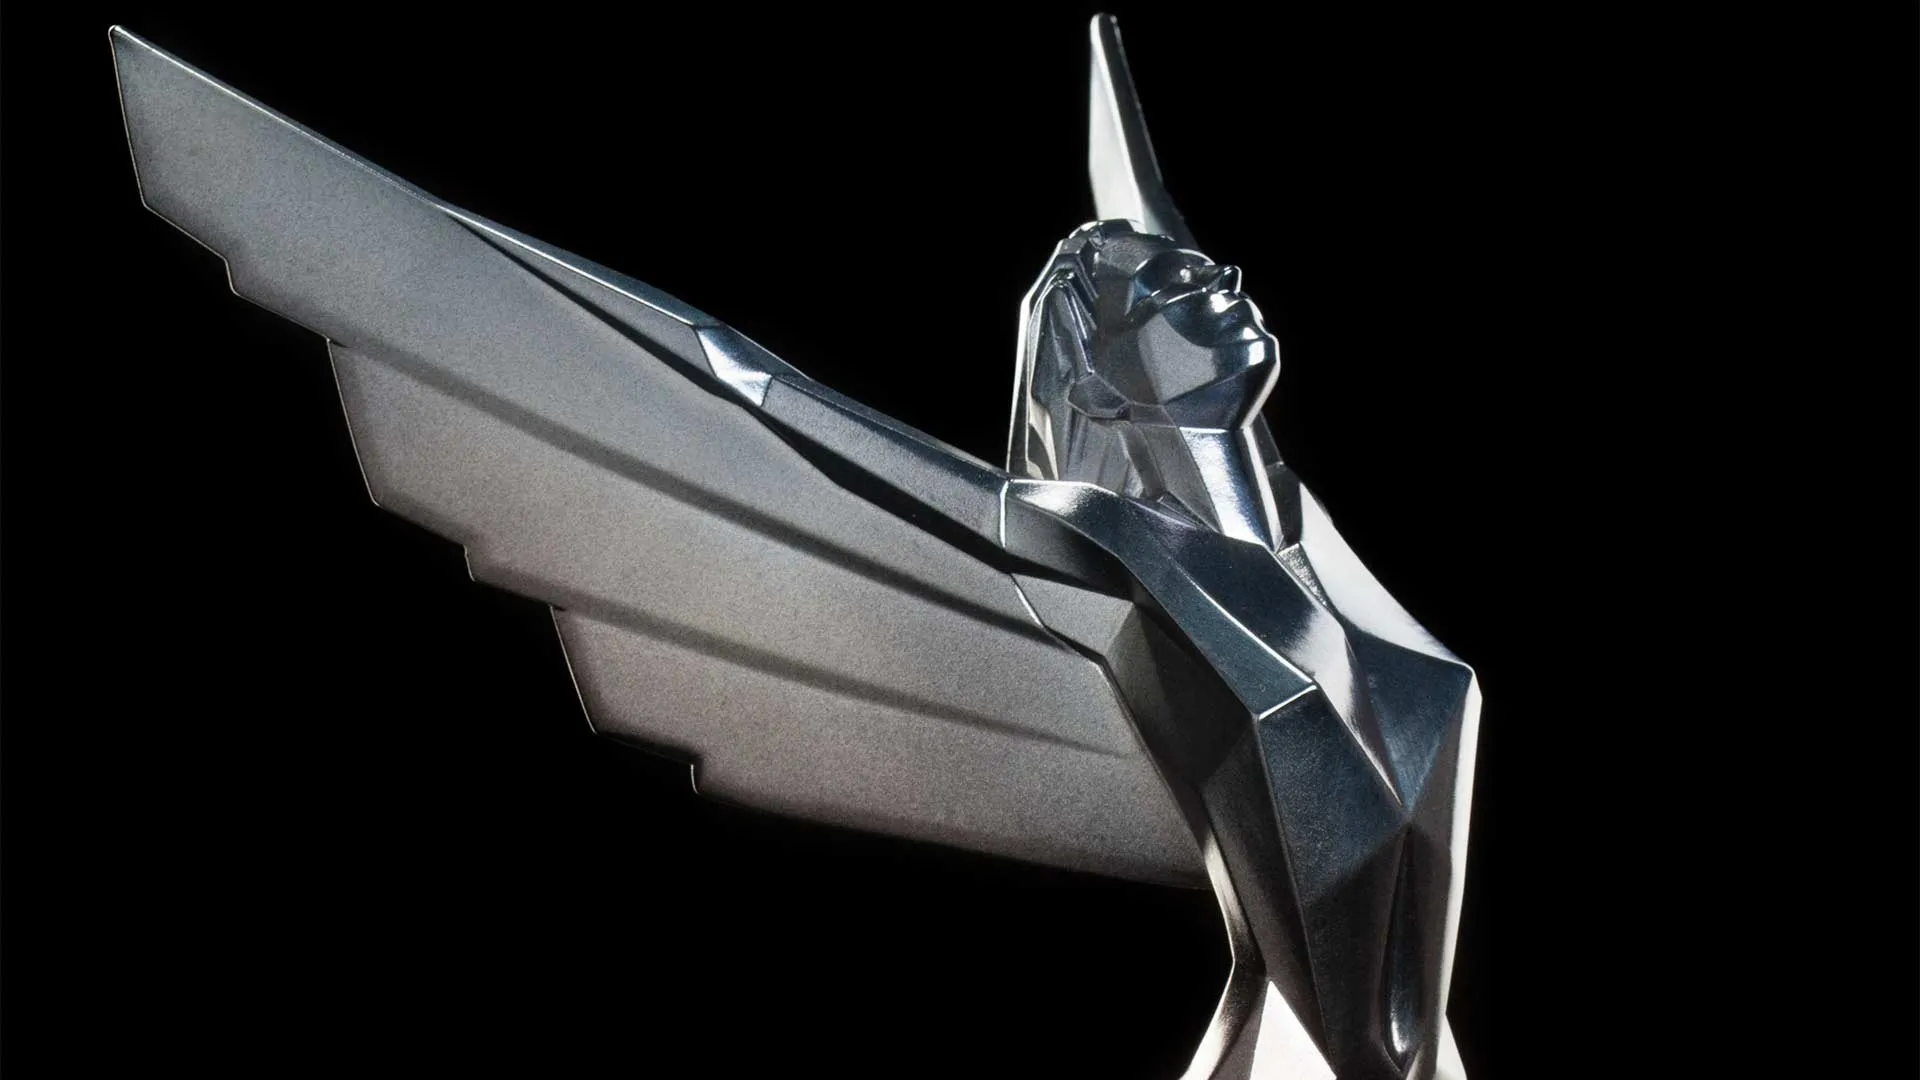 Here Are All The Winners Of The 2017 Game Awards